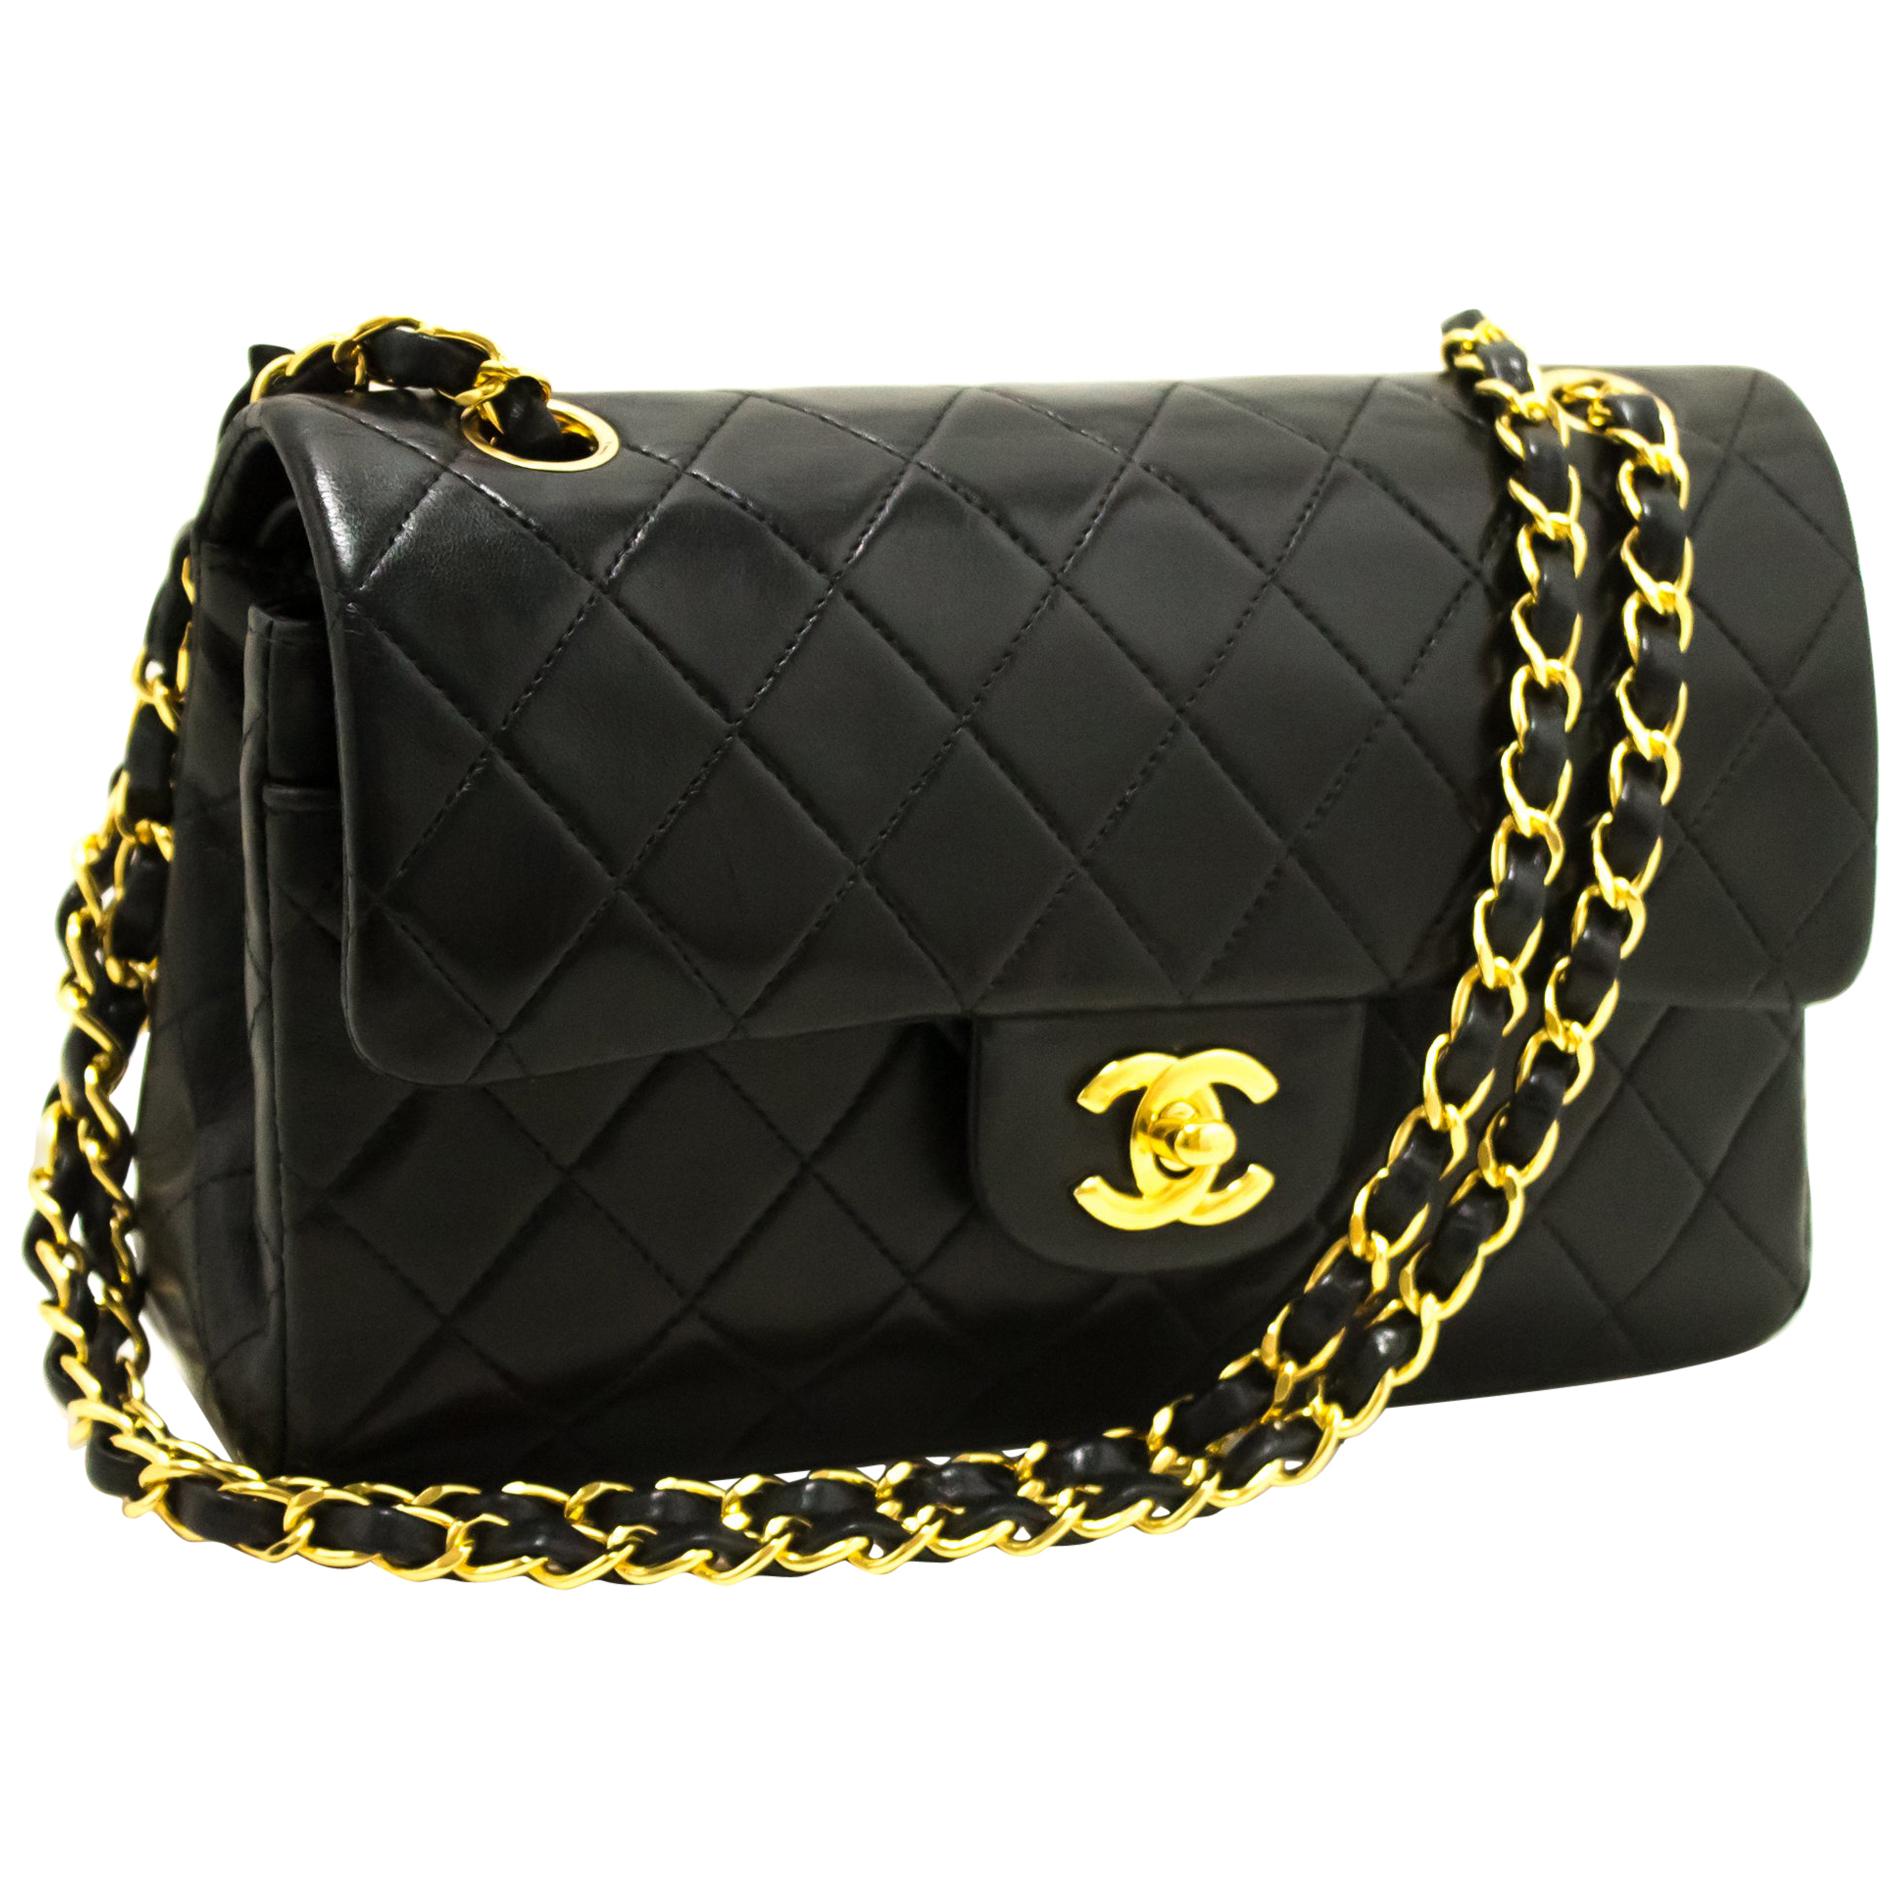 CHANEL 2.55 Double Flap Small Chain Shoulder Bag Black Quilted